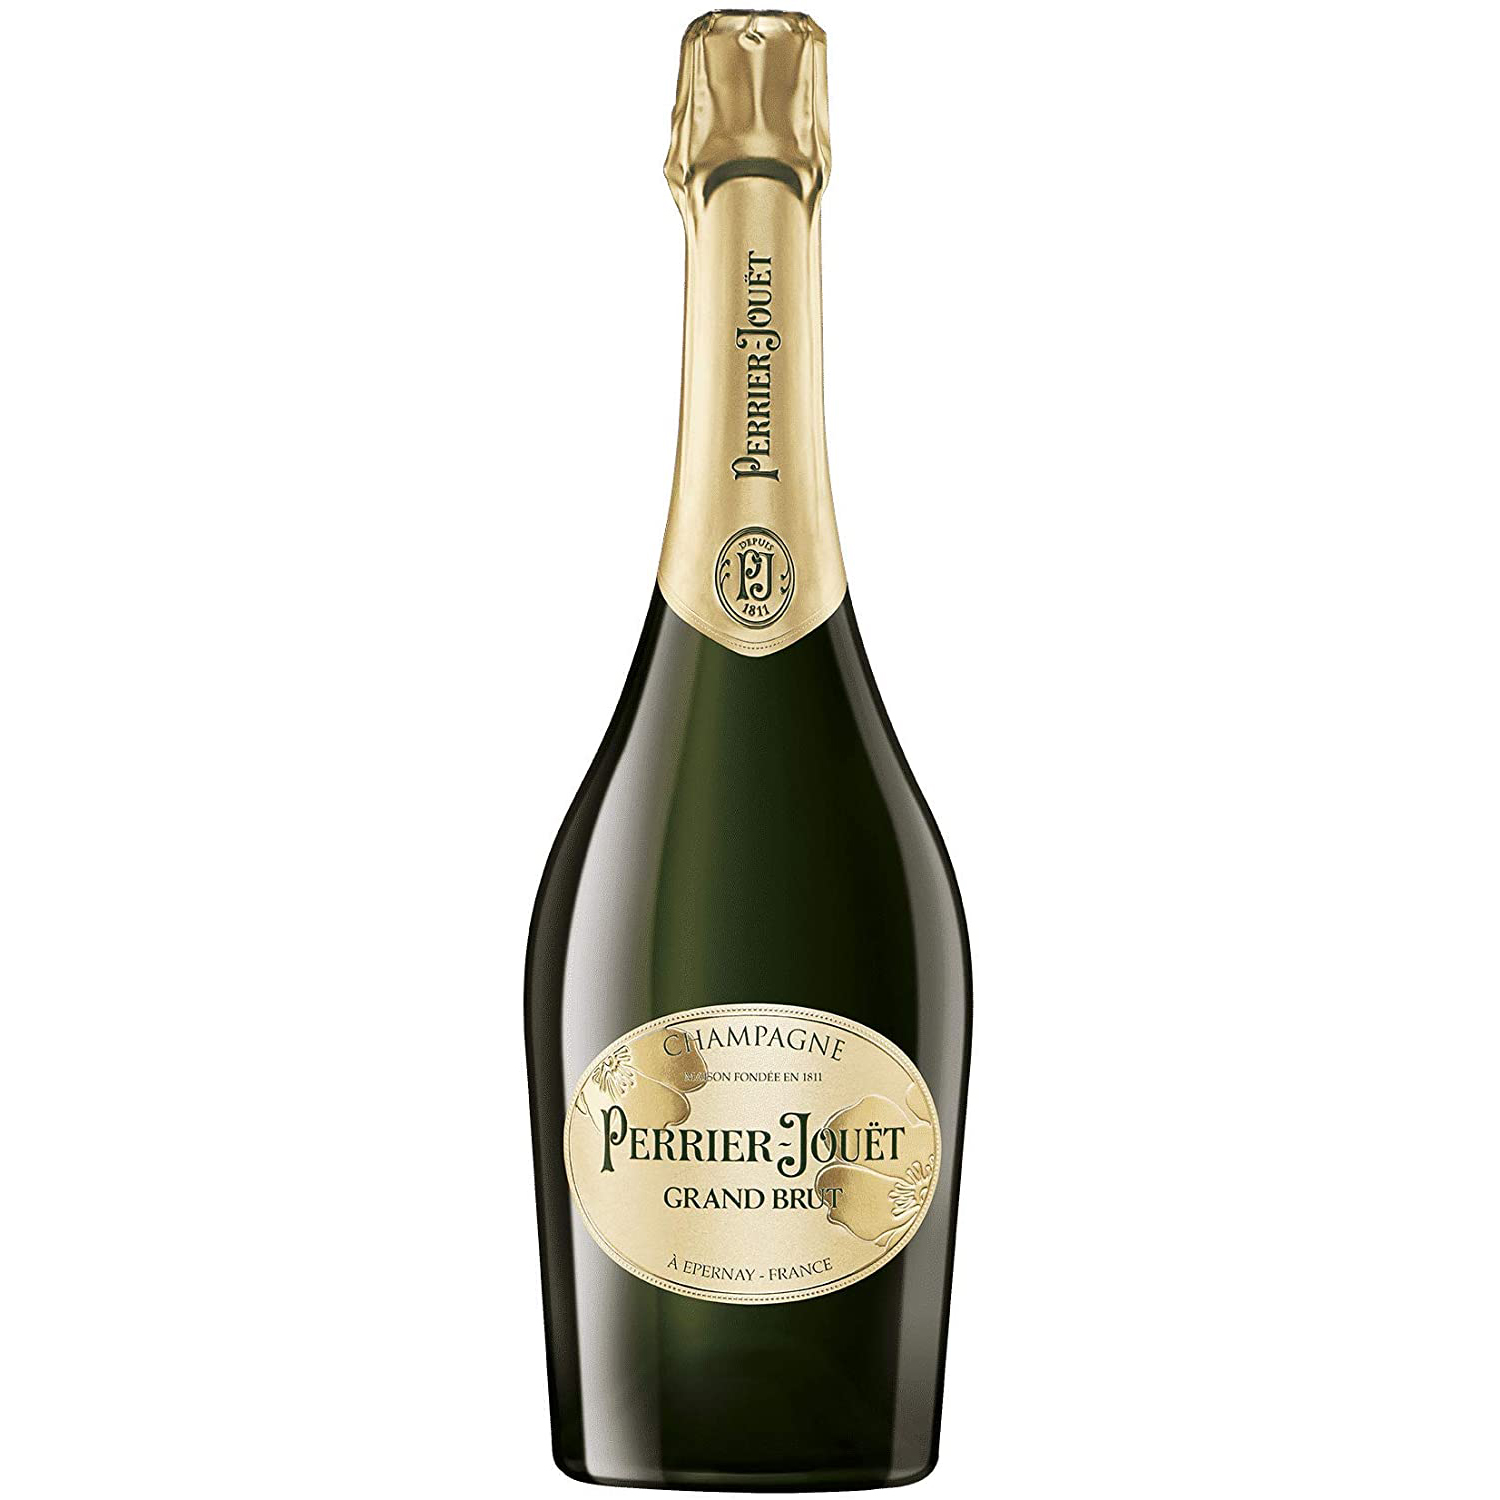 Perrier Jouet Brut Champagne75cl Great Price and Home Delivery